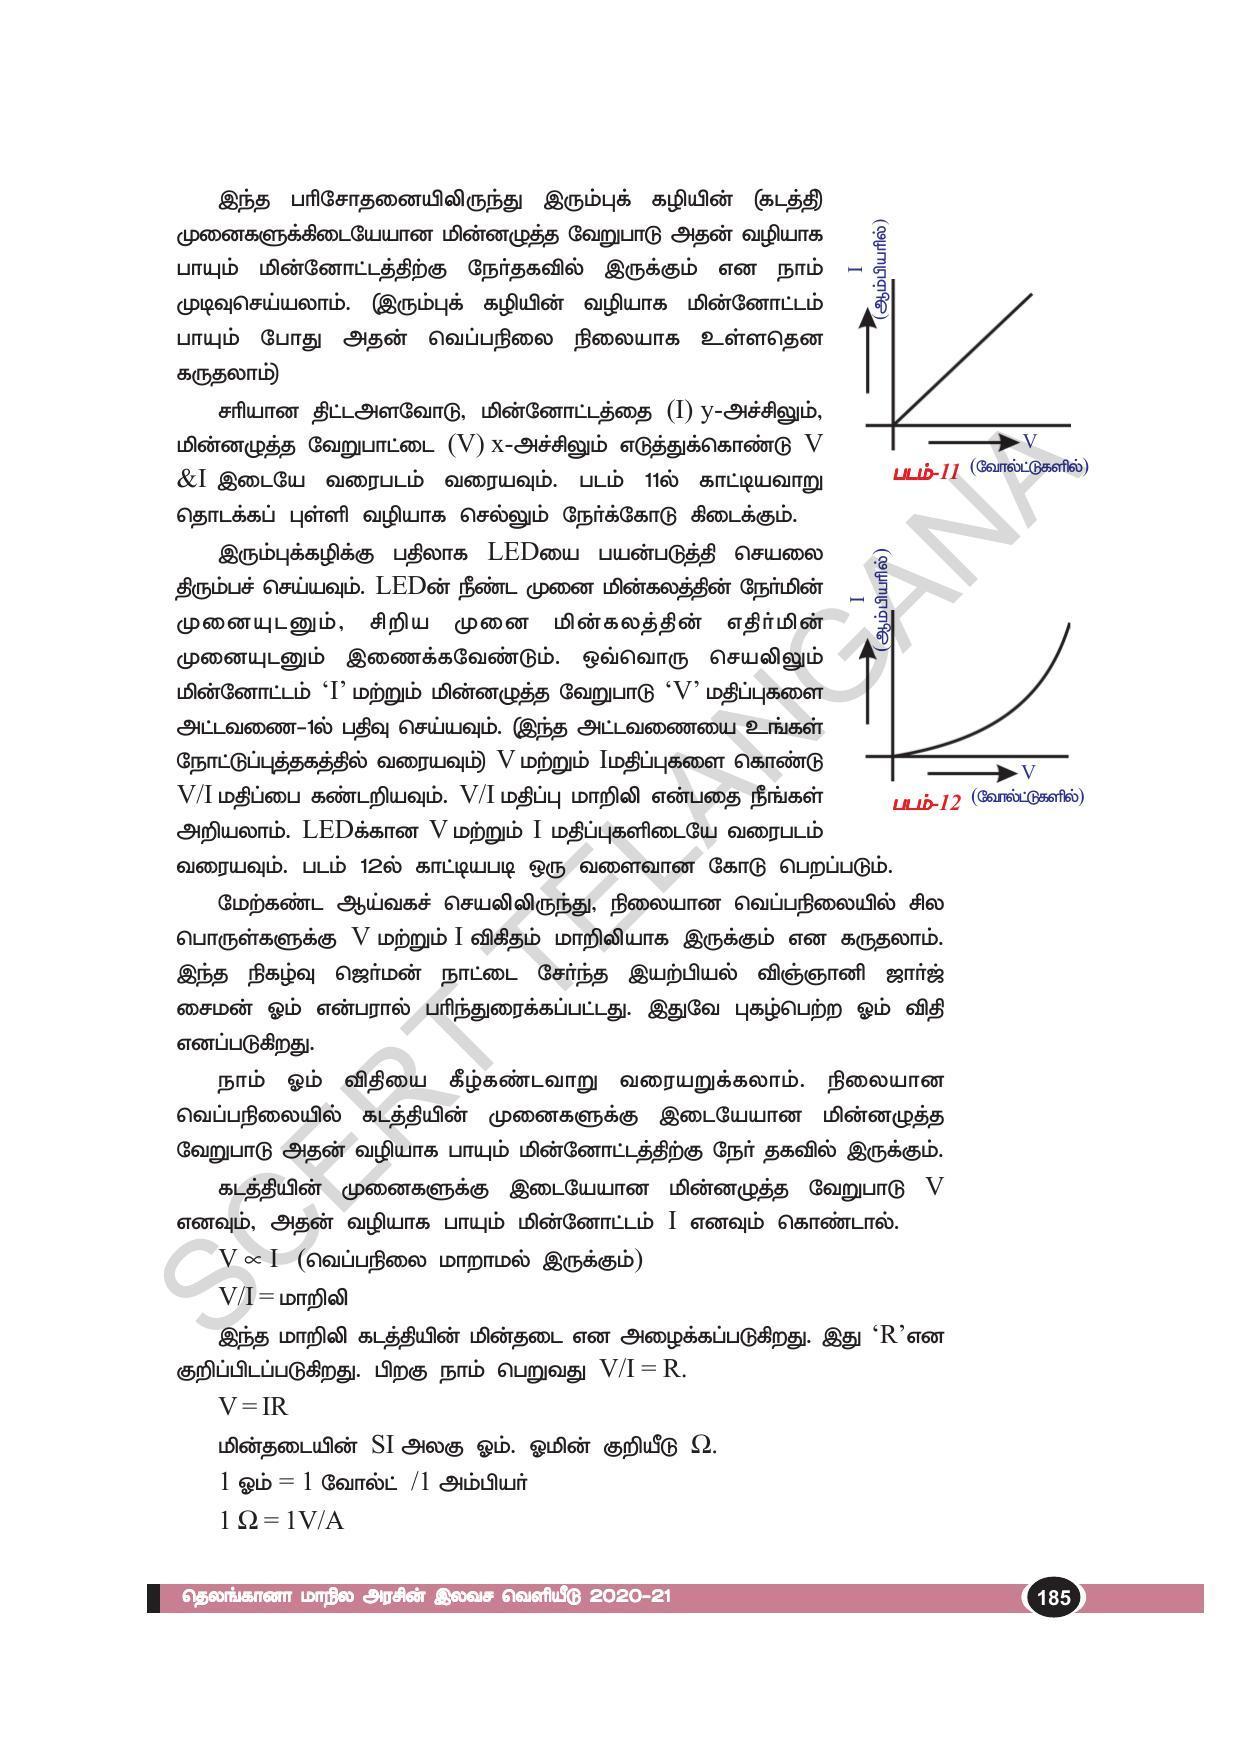 TS SCERT Class 10 Physical Science(Tamil Medium) Text Book - Page 197